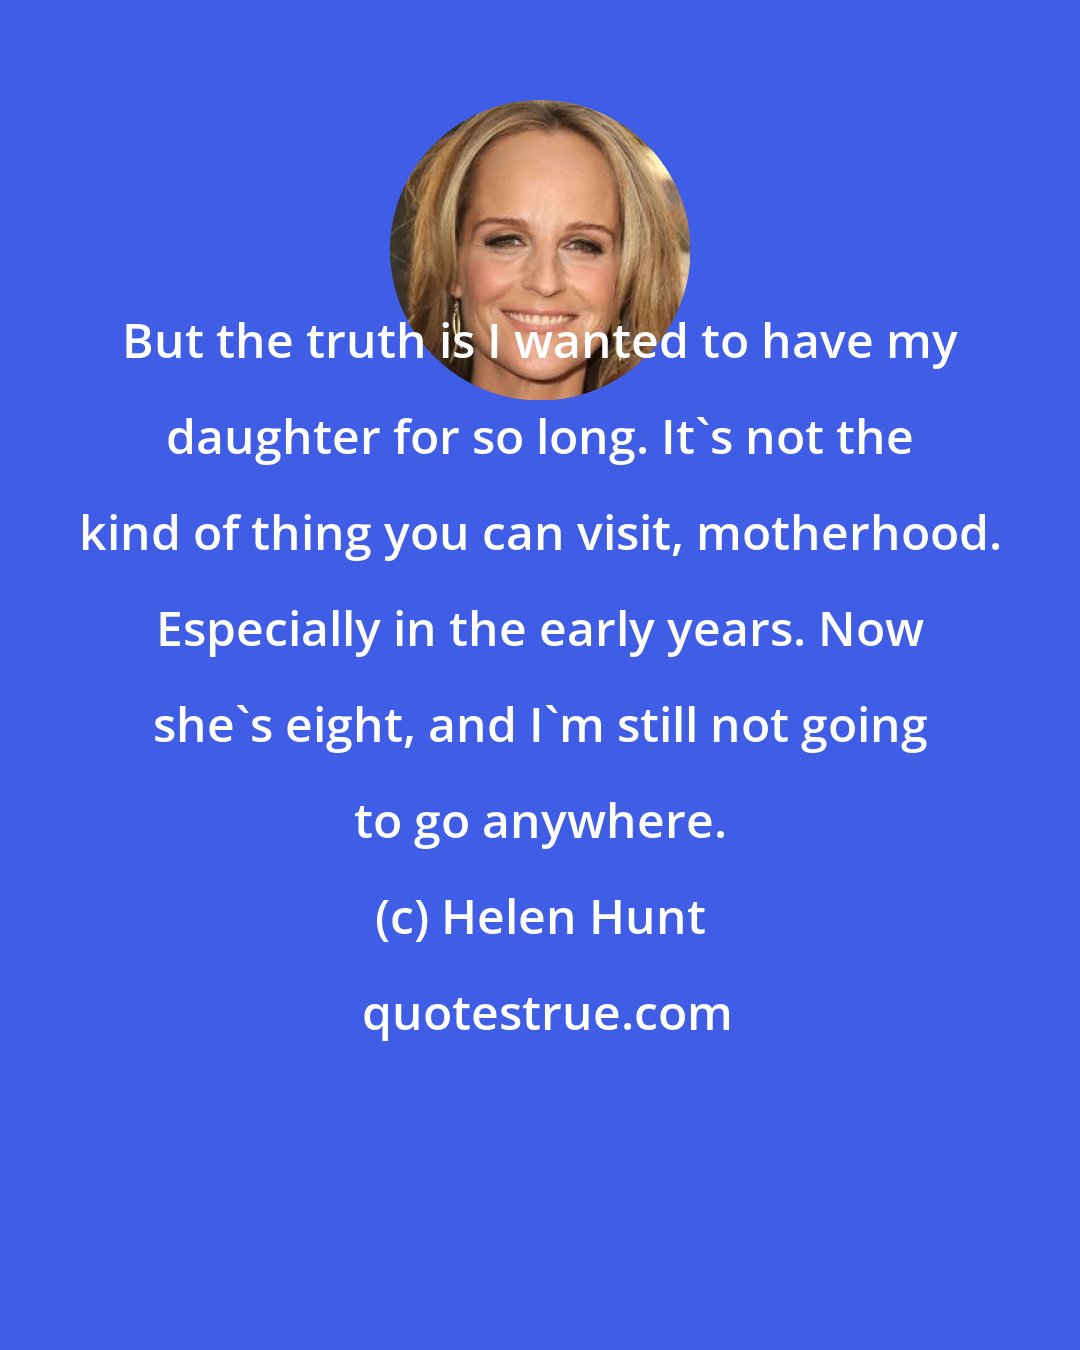 Helen Hunt: But the truth is I wanted to have my daughter for so long. It's not the kind of thing you can visit, motherhood. Especially in the early years. Now she's eight, and I'm still not going to go anywhere.